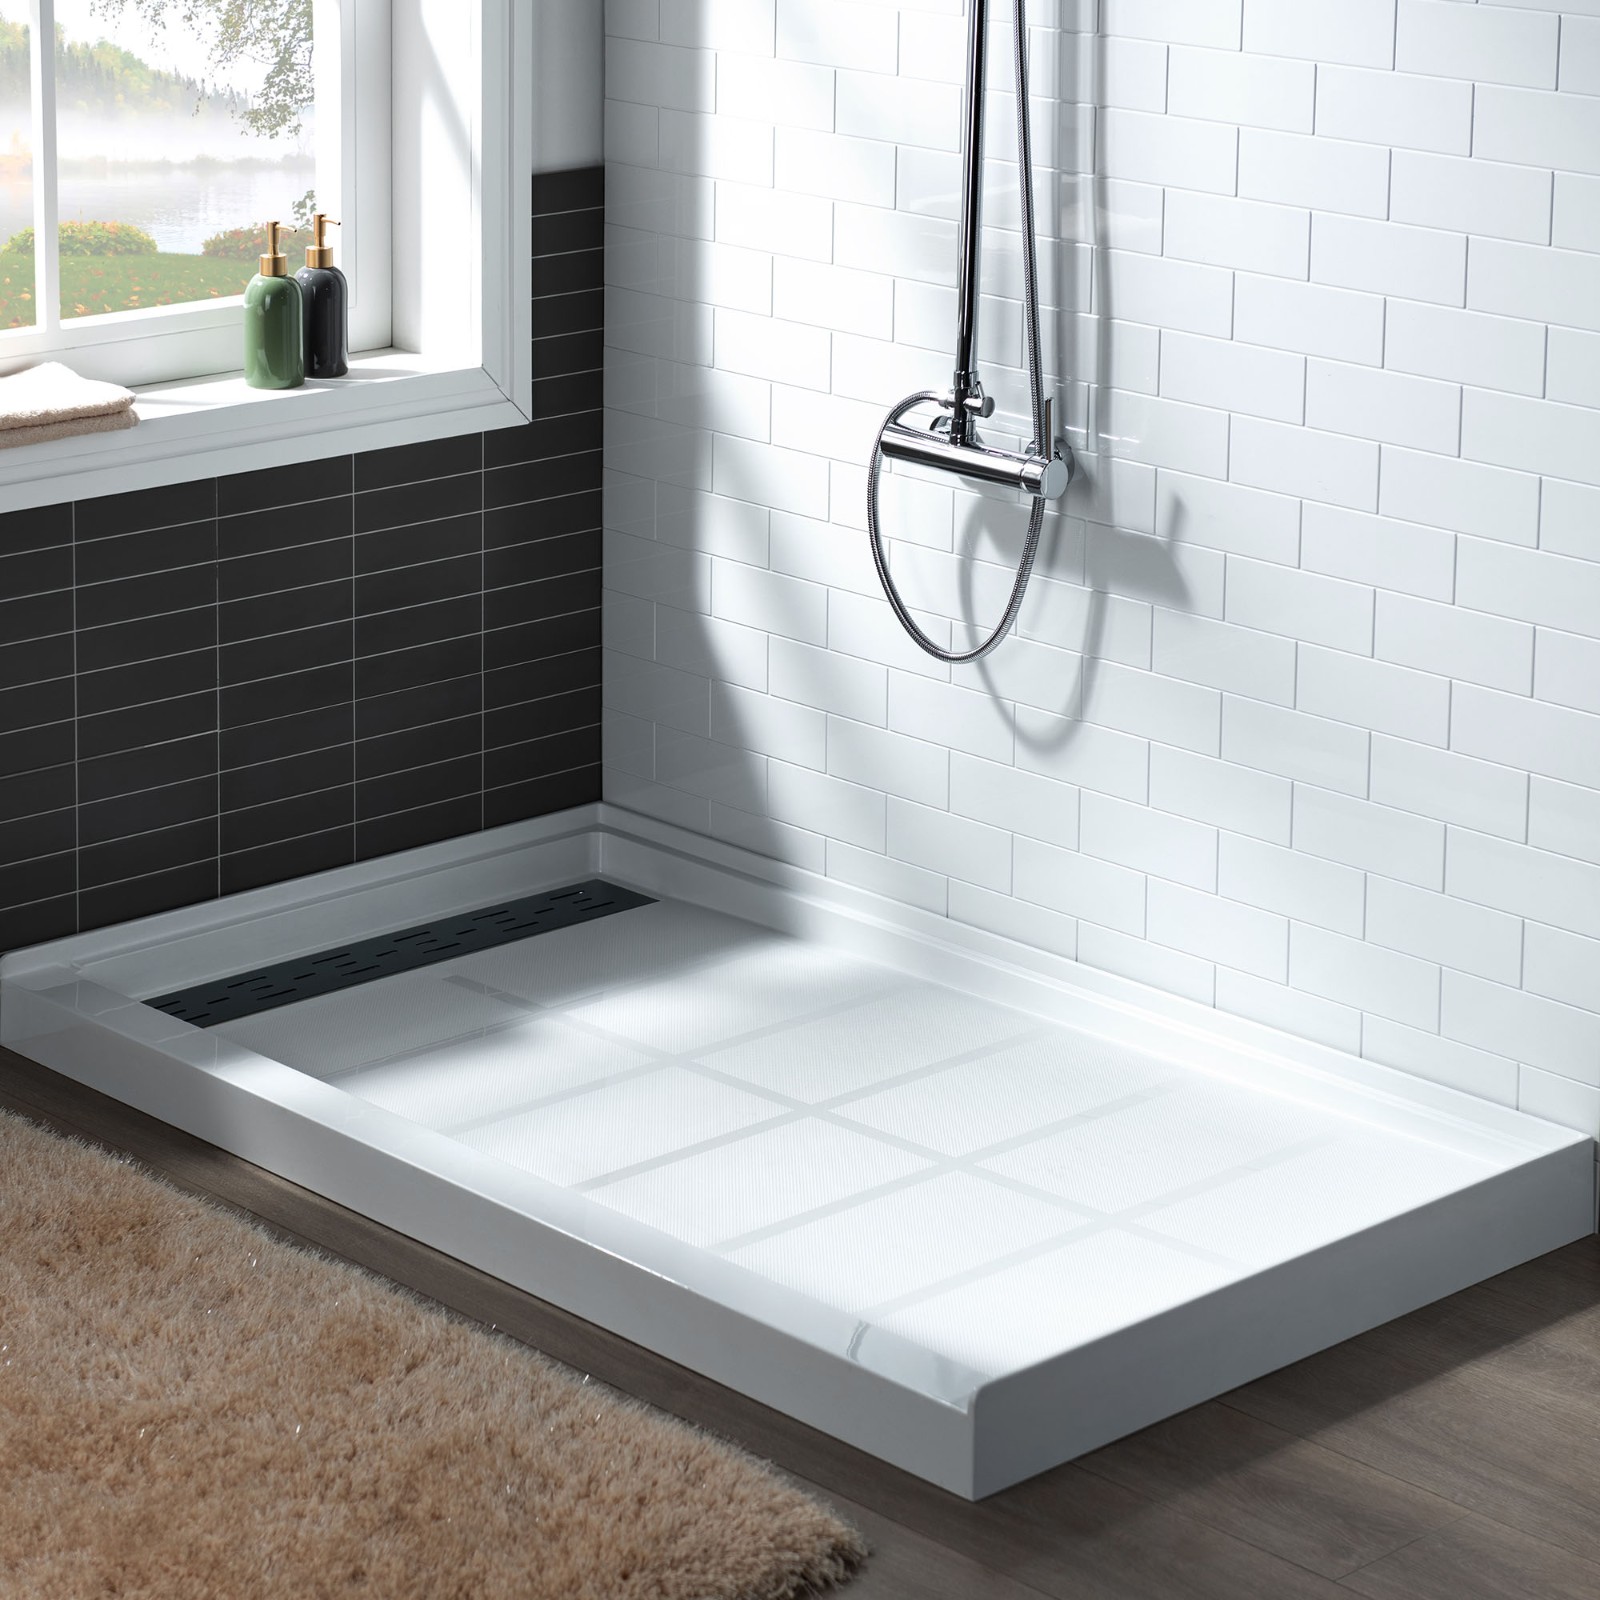  WOODBRIDGE SBR4832-1000L-MB SolidSurface Shower Base with Recessed Trench Side Including Matte Black Linear Cover, 48